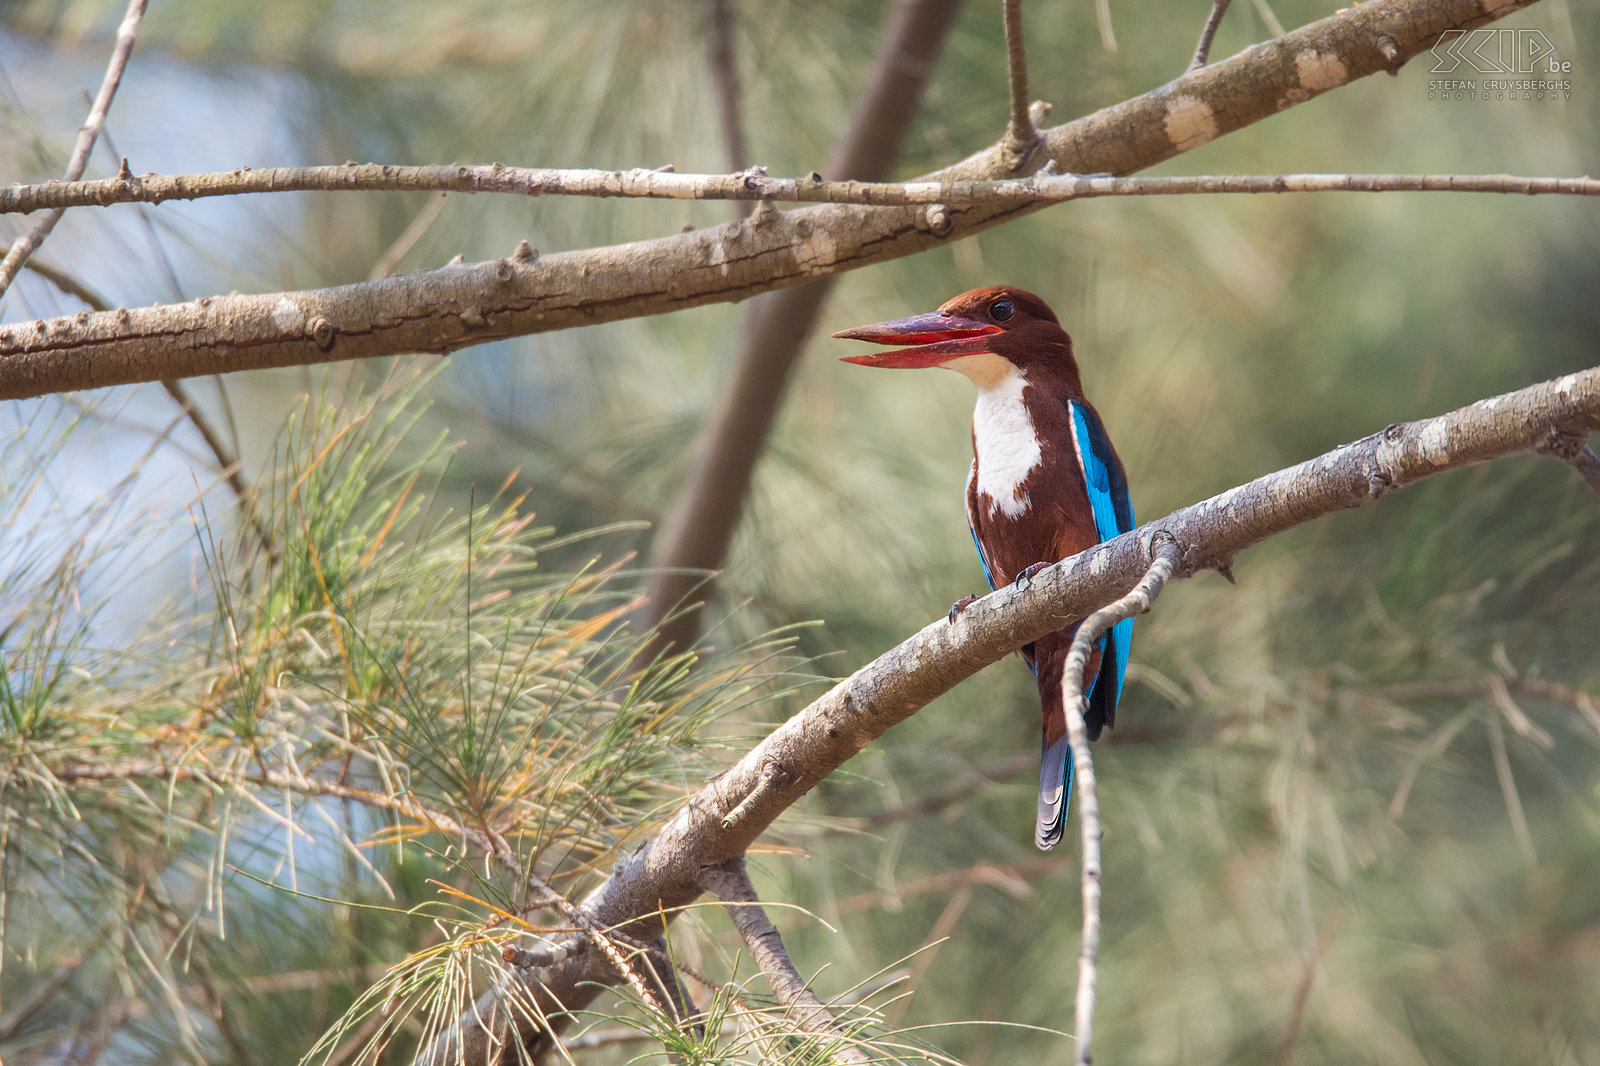 Varca - White-throated kingfisher We ended our trip at the tropical beach of Varca in the state of Goa. Goa is the smallest state of India and it was a colony of Portugal from 1510 to 1961. In Varca we spotted a white-throated kingfisher (Halcyon smyrnensis) Stefan Cruysberghs